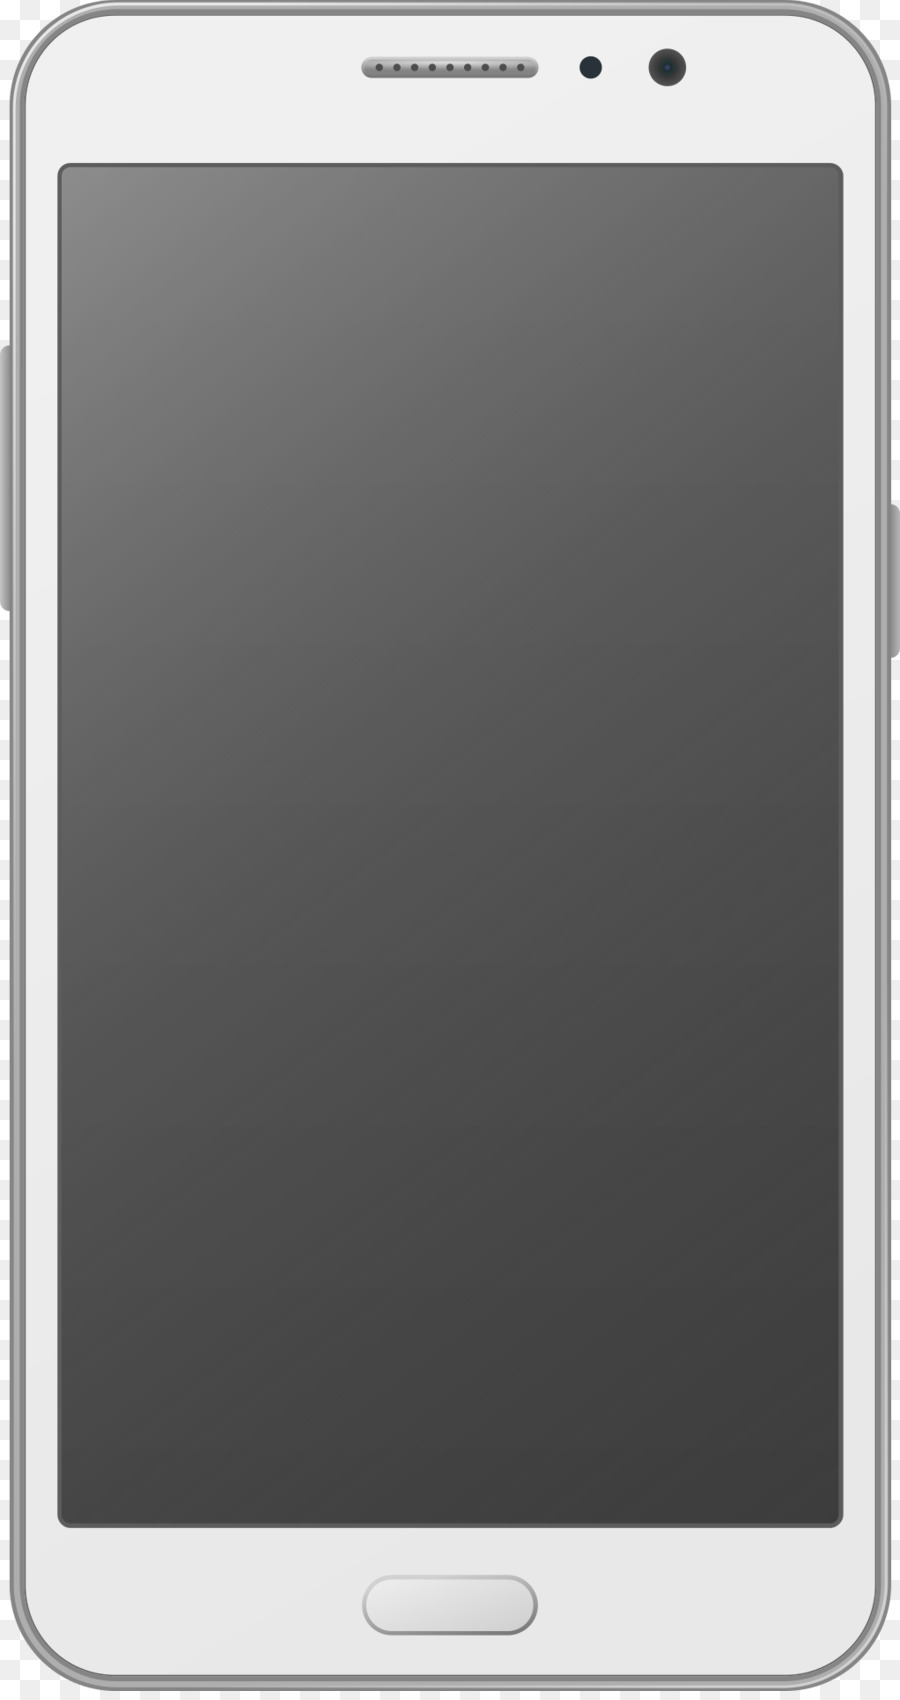 Smartphone，Iphone PNG